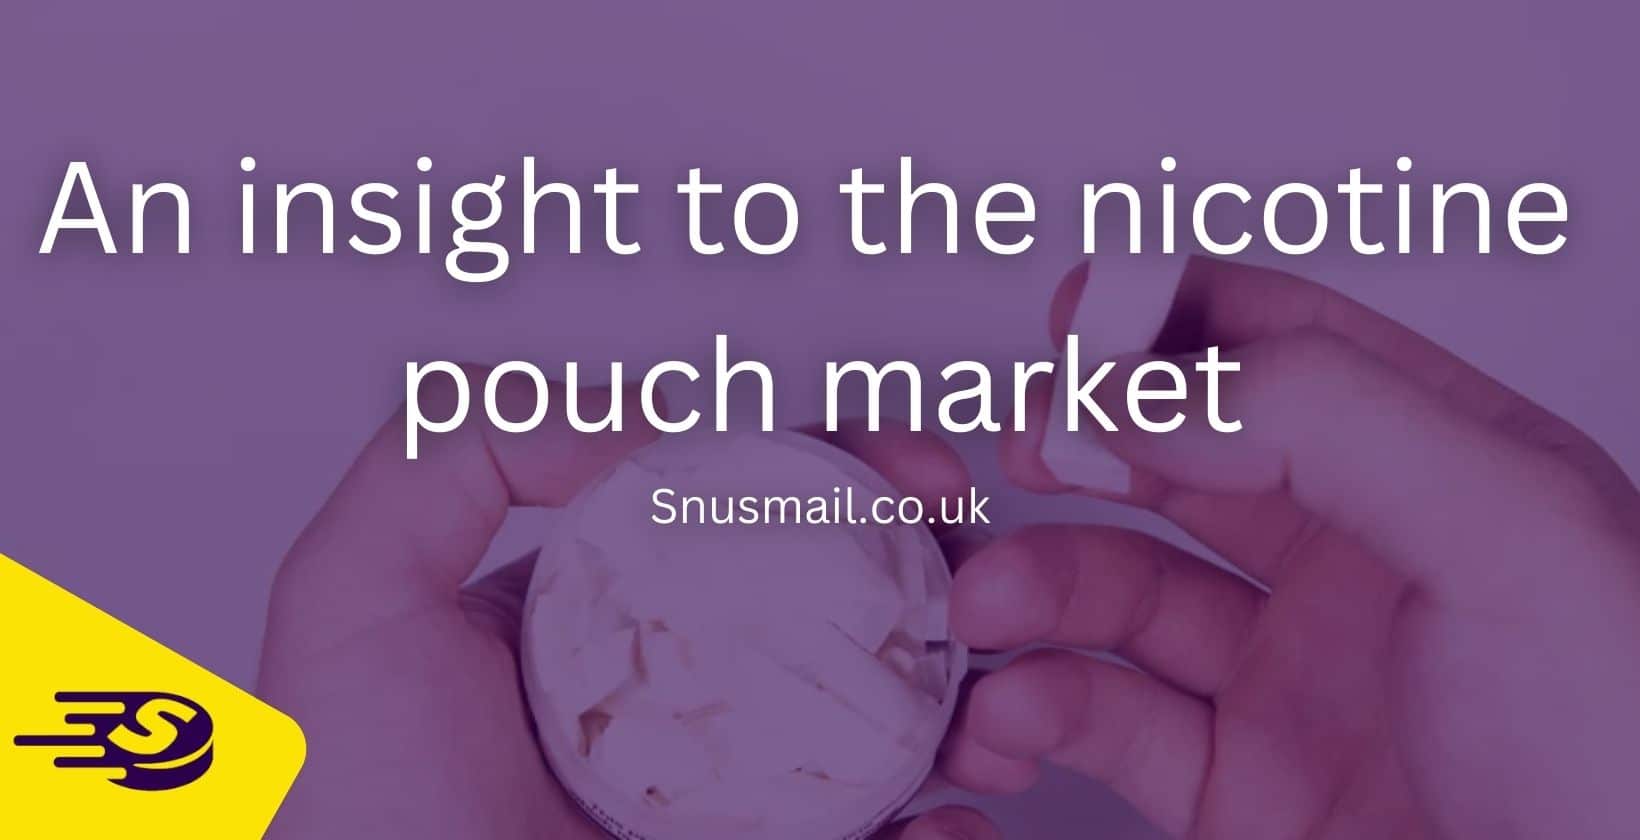 An insight to the nicotine pouch market Snusmail.co.uk